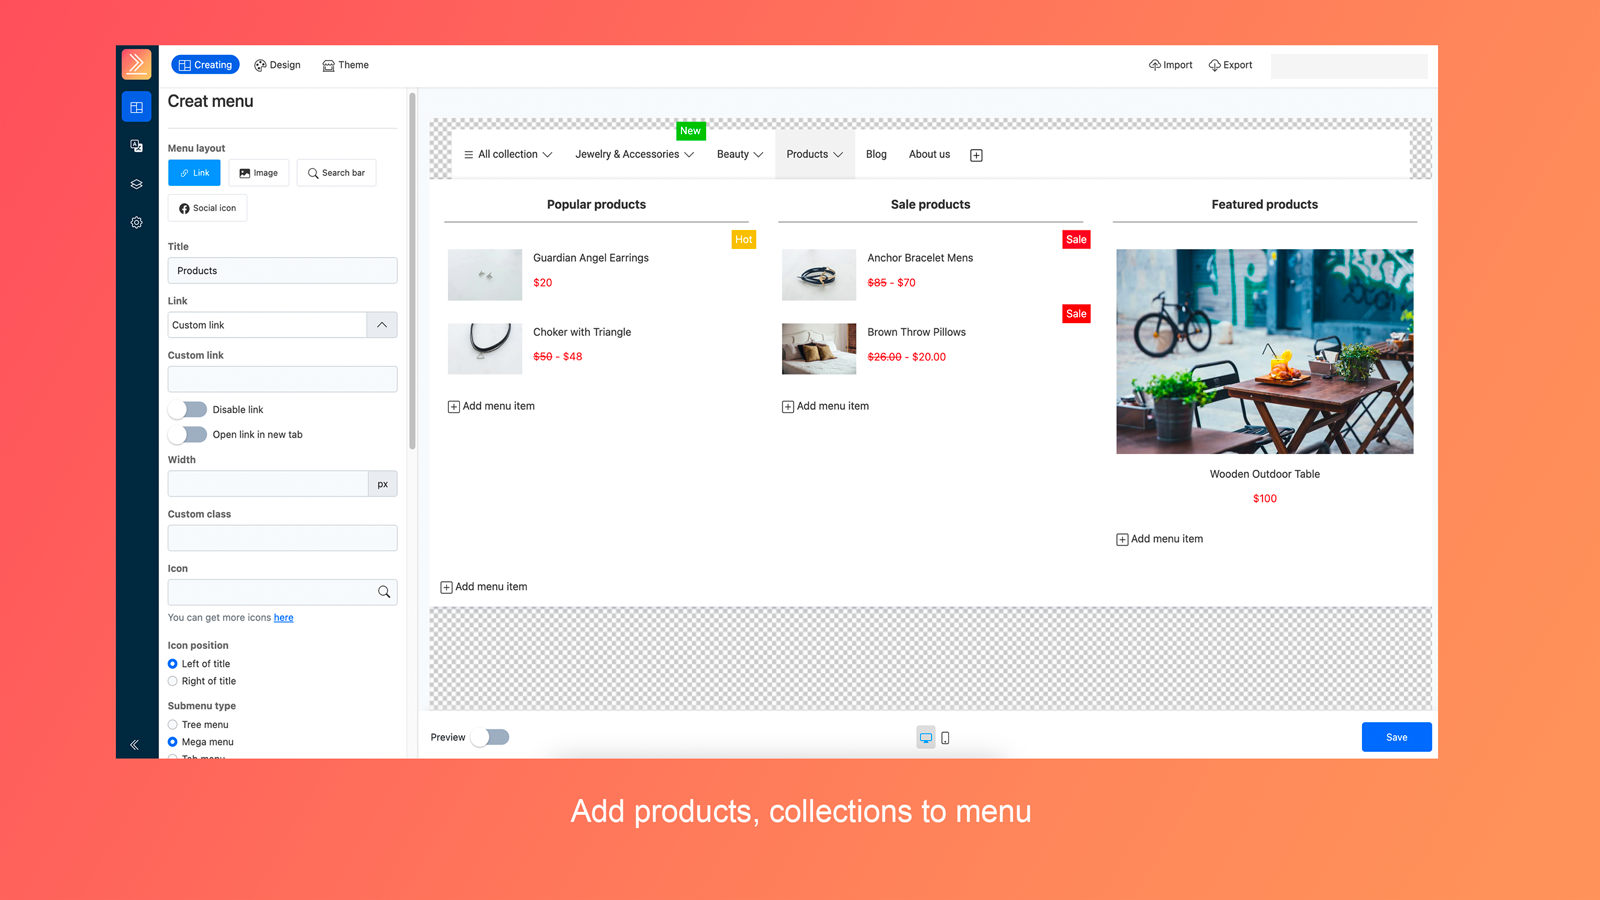 Add products, collections to menu